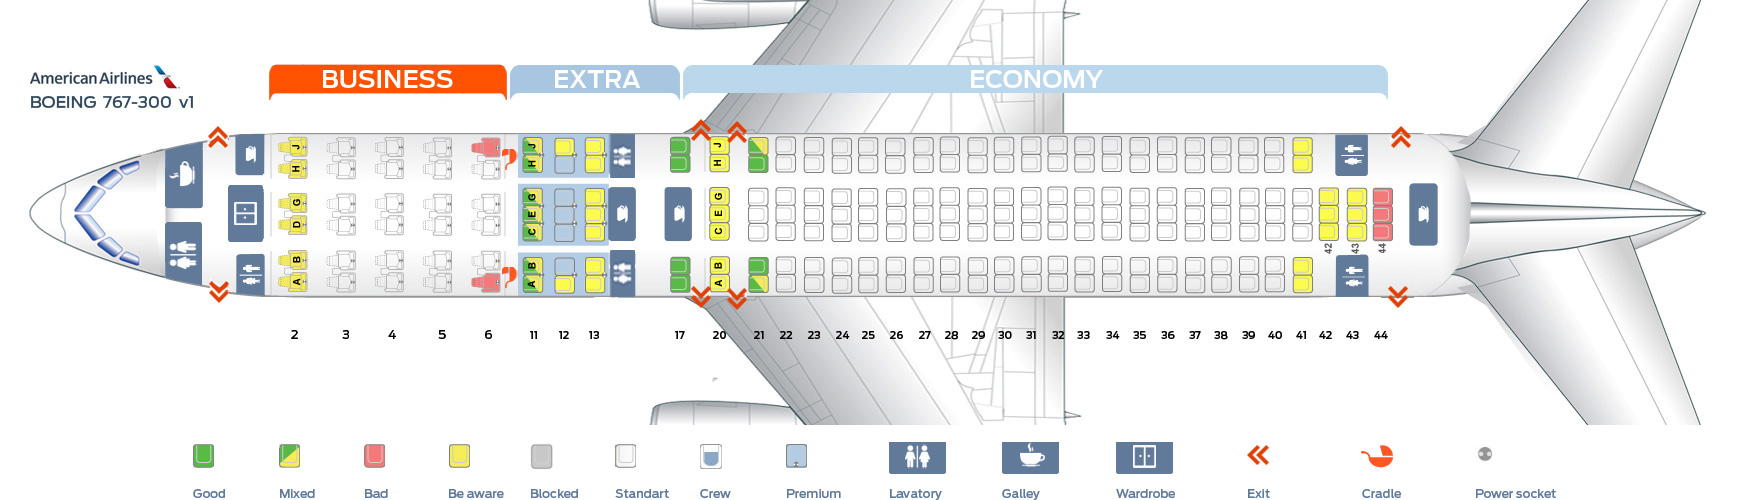 Boeing 763 Seating Chart American Airlines